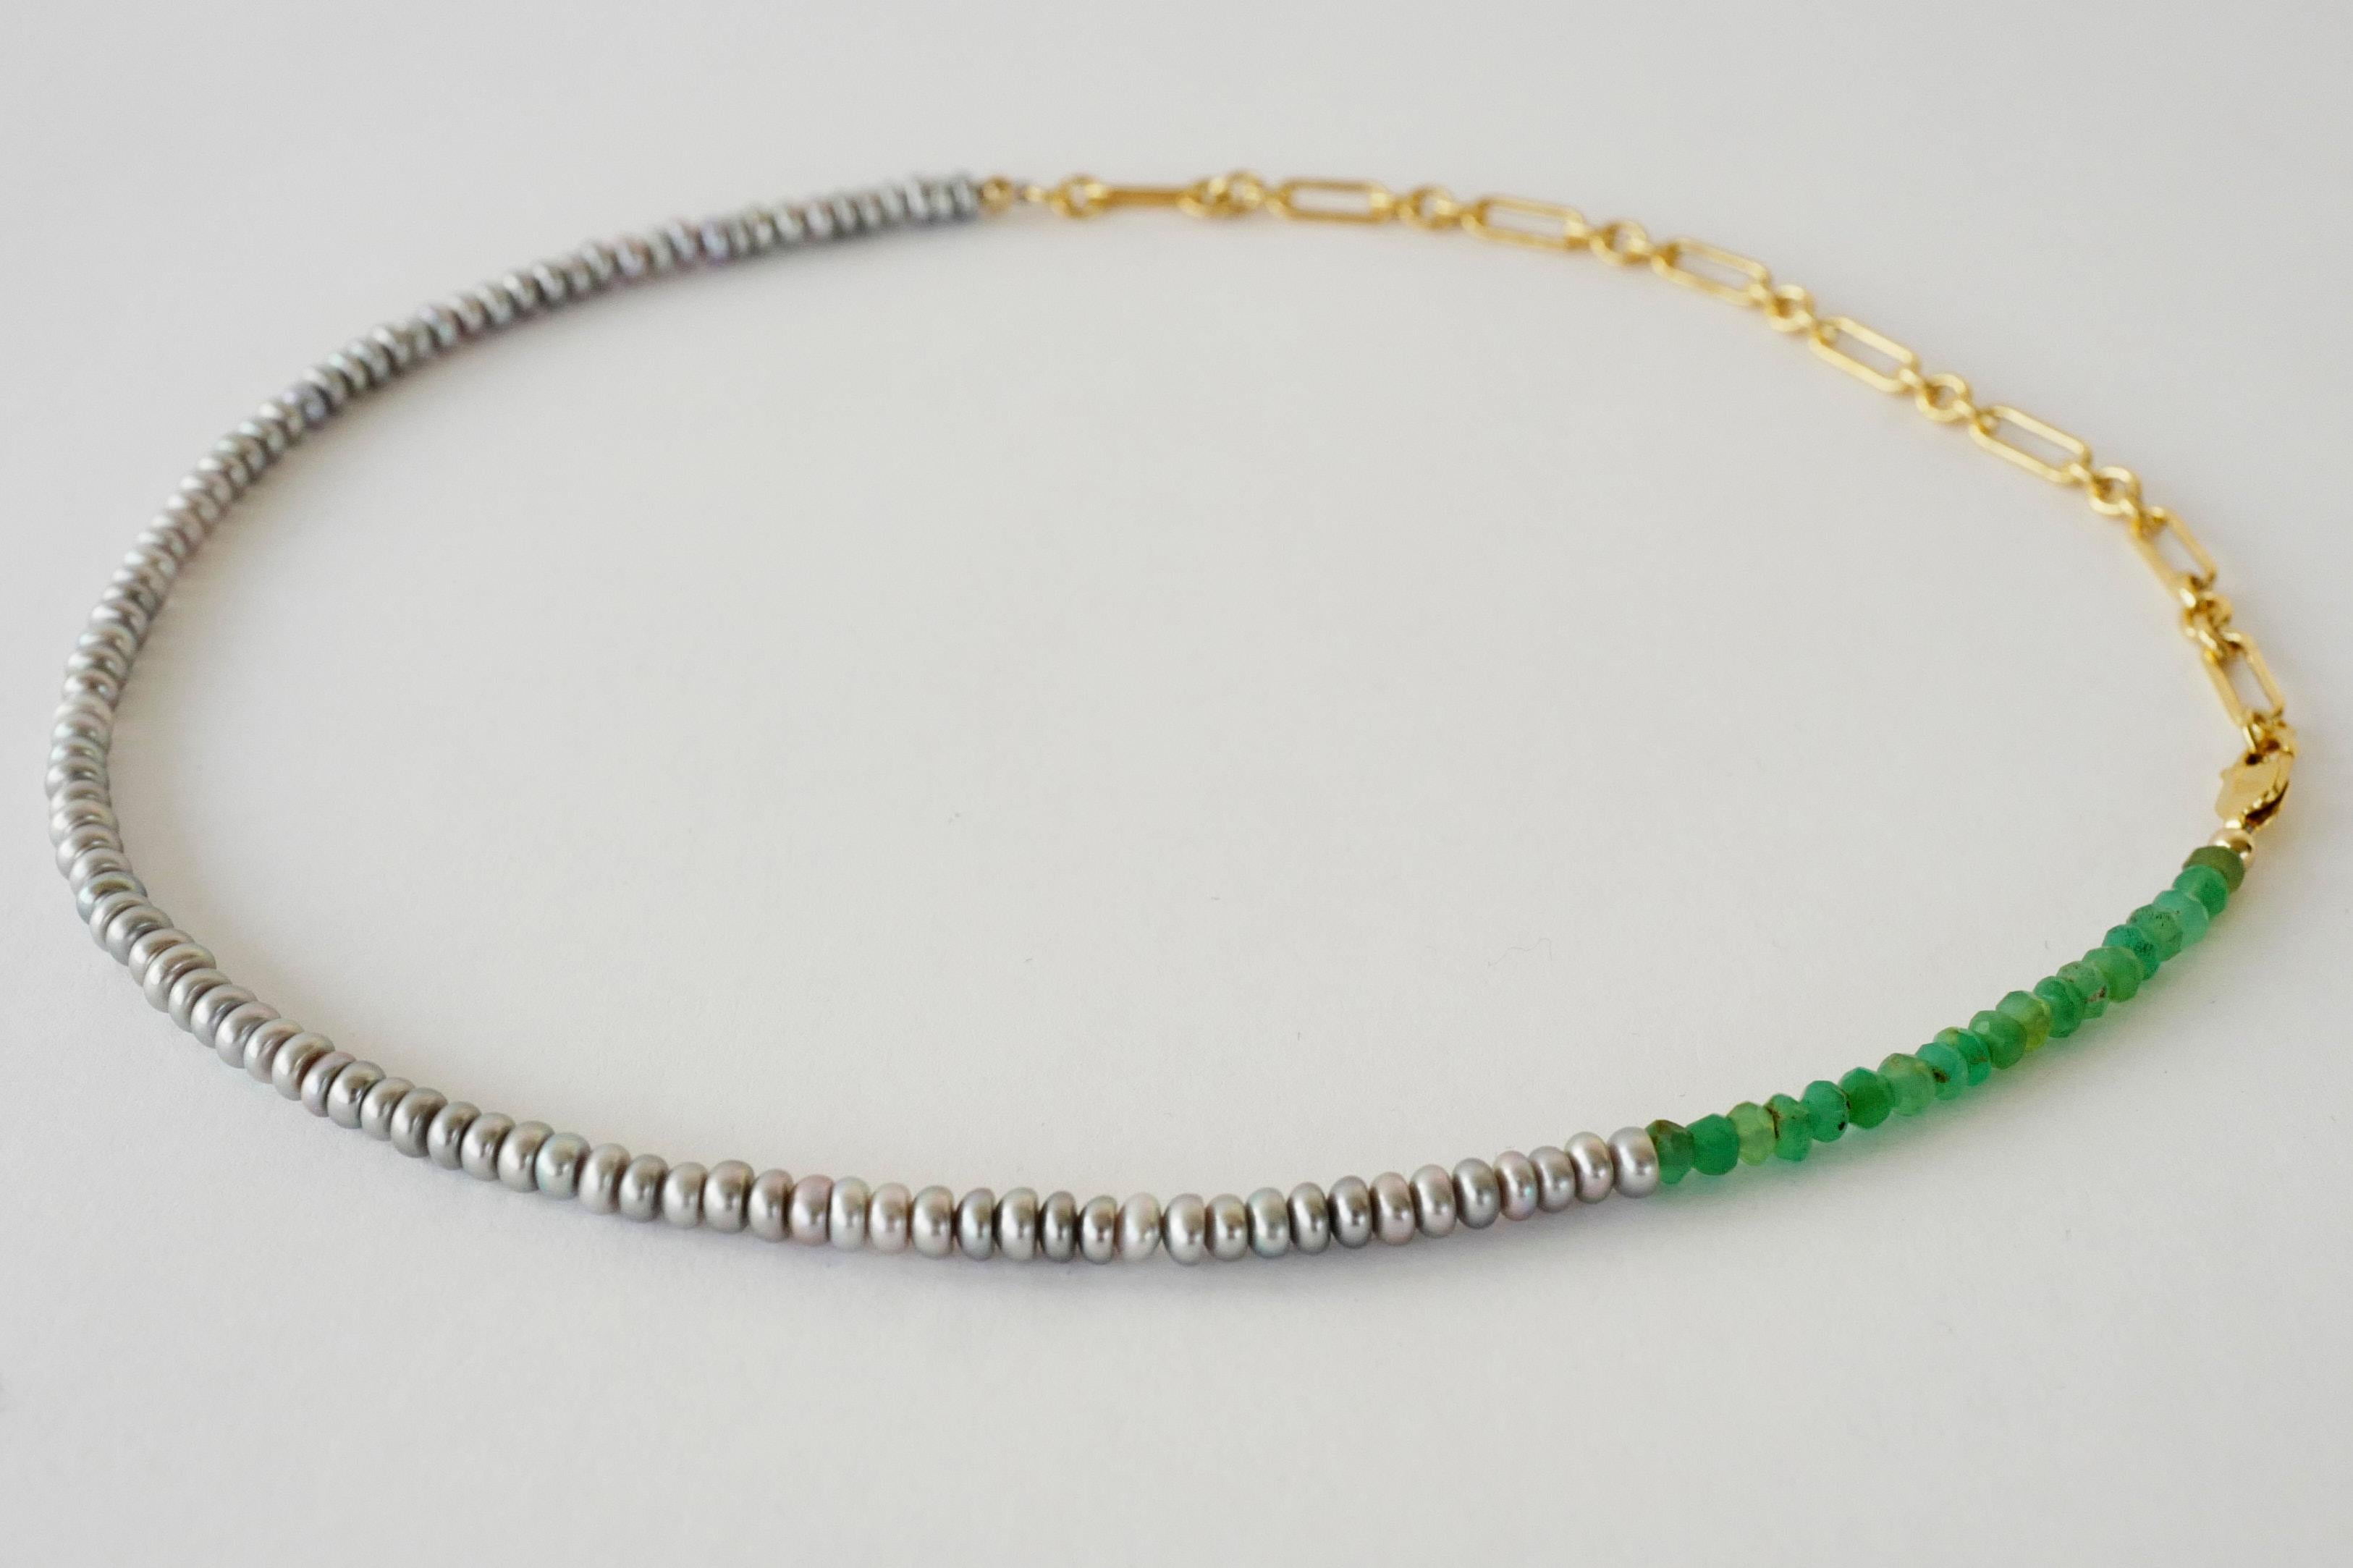 Romantic Pearl Bead Necklace Choker Chain Chrysoprase J Dauphin For Sale